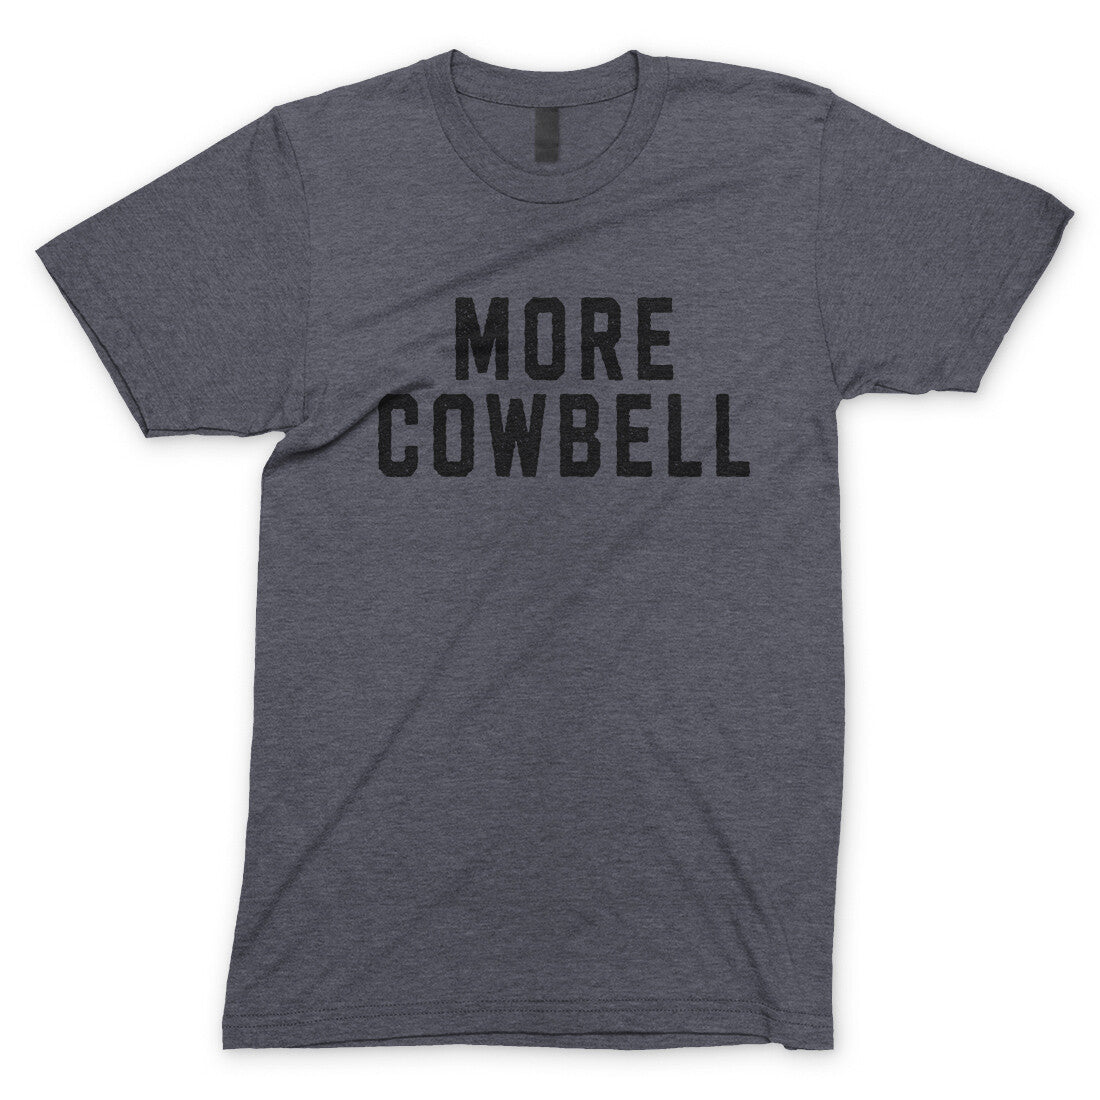 More Cowbell in Dark Heather Color